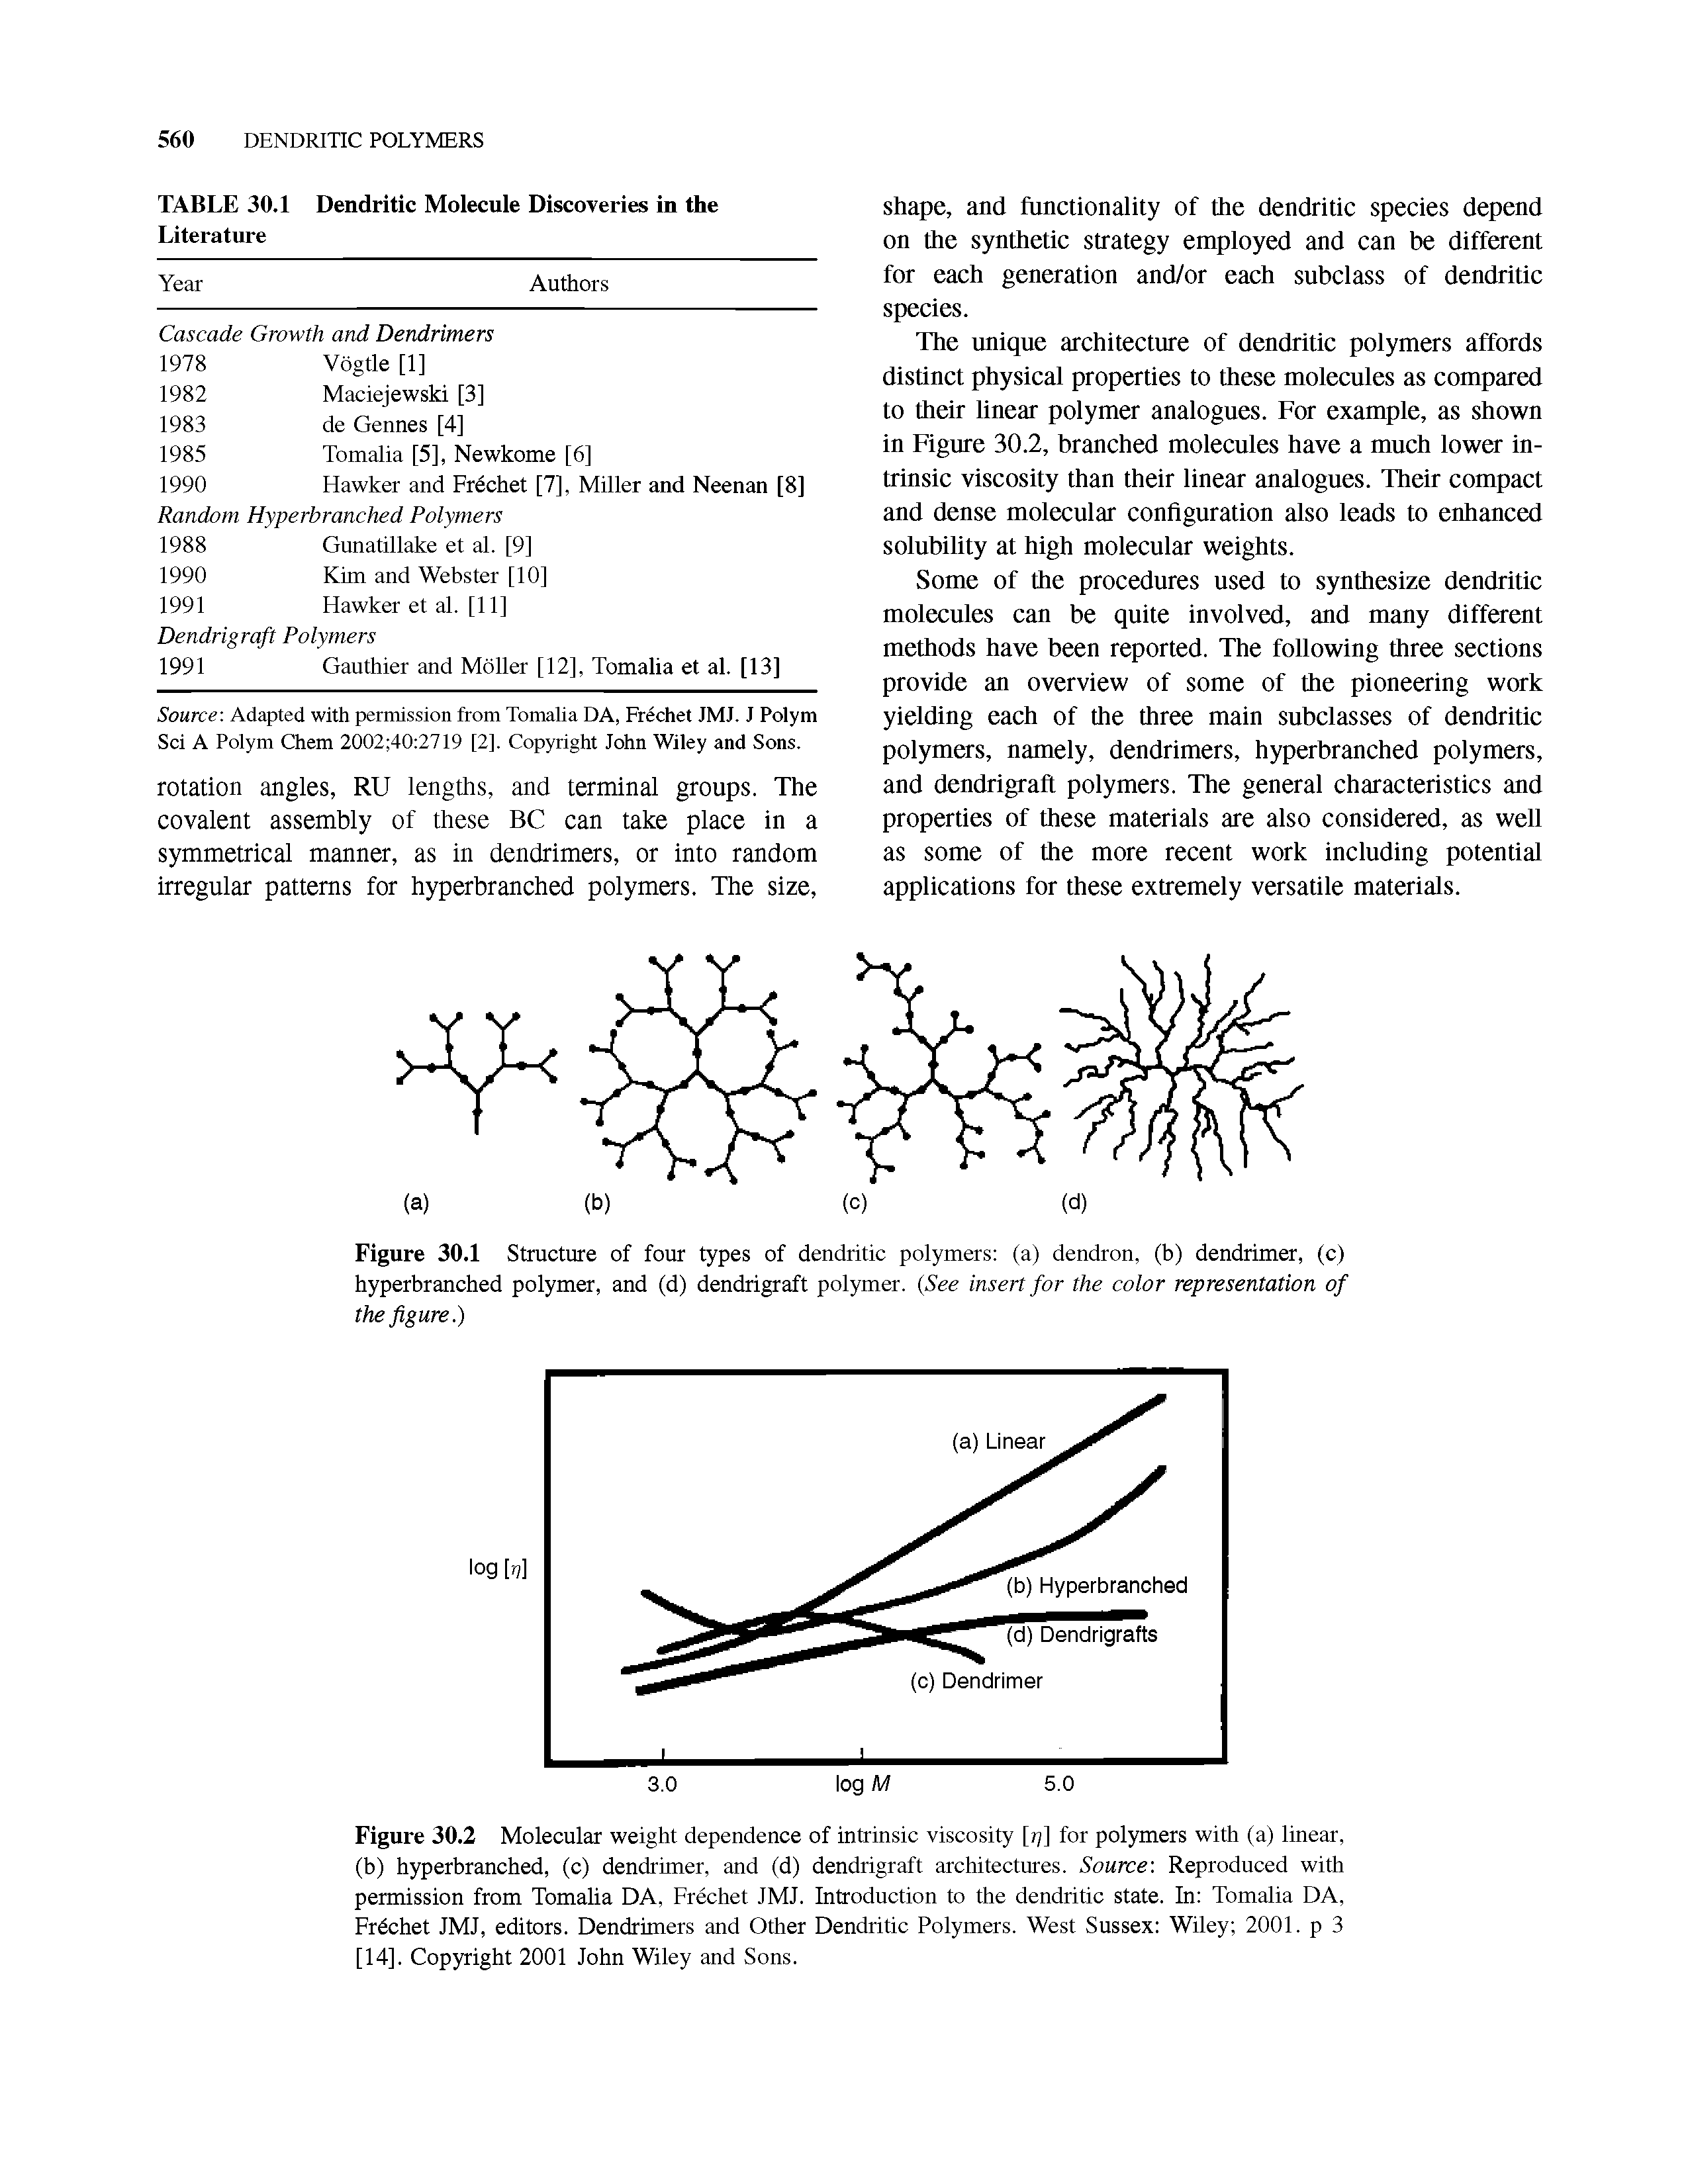 Figure 30.2 Molecular weight dependence of intrinsic viscosity [/ ] for polymers with (a) linear, (b) hyperbranched, (c) dendrimer, and (d) dendrigraft architectures. Source Reproduced with permission from Tomalia DA, Frechet JMJ. Introduction to the dendritic state. In Tomalia DA, Frdchet JMJ, editors. Dendrimers and Other Dendritic Polymers. West Sussex Wiley 2001. p 3 [14]. Copyright 2001 John Wiley and Sons.